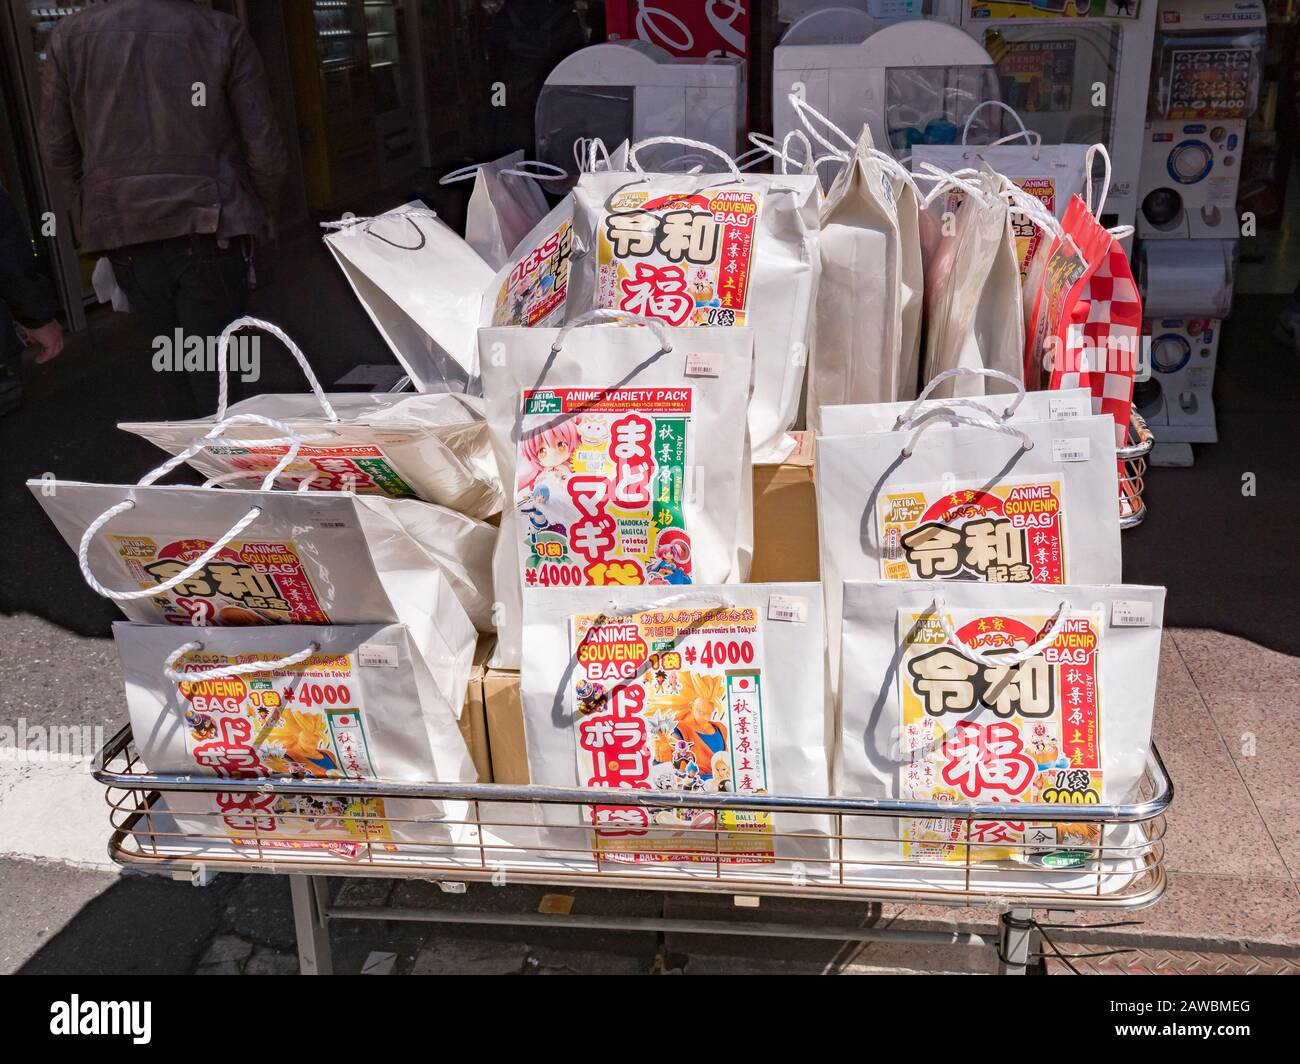 9 April 2019: Tokyo, Japan - Fukubukuro or lucky bags containing manga and anime related toys and collectibles outside a shop in the Akihabara distric Stock Photo